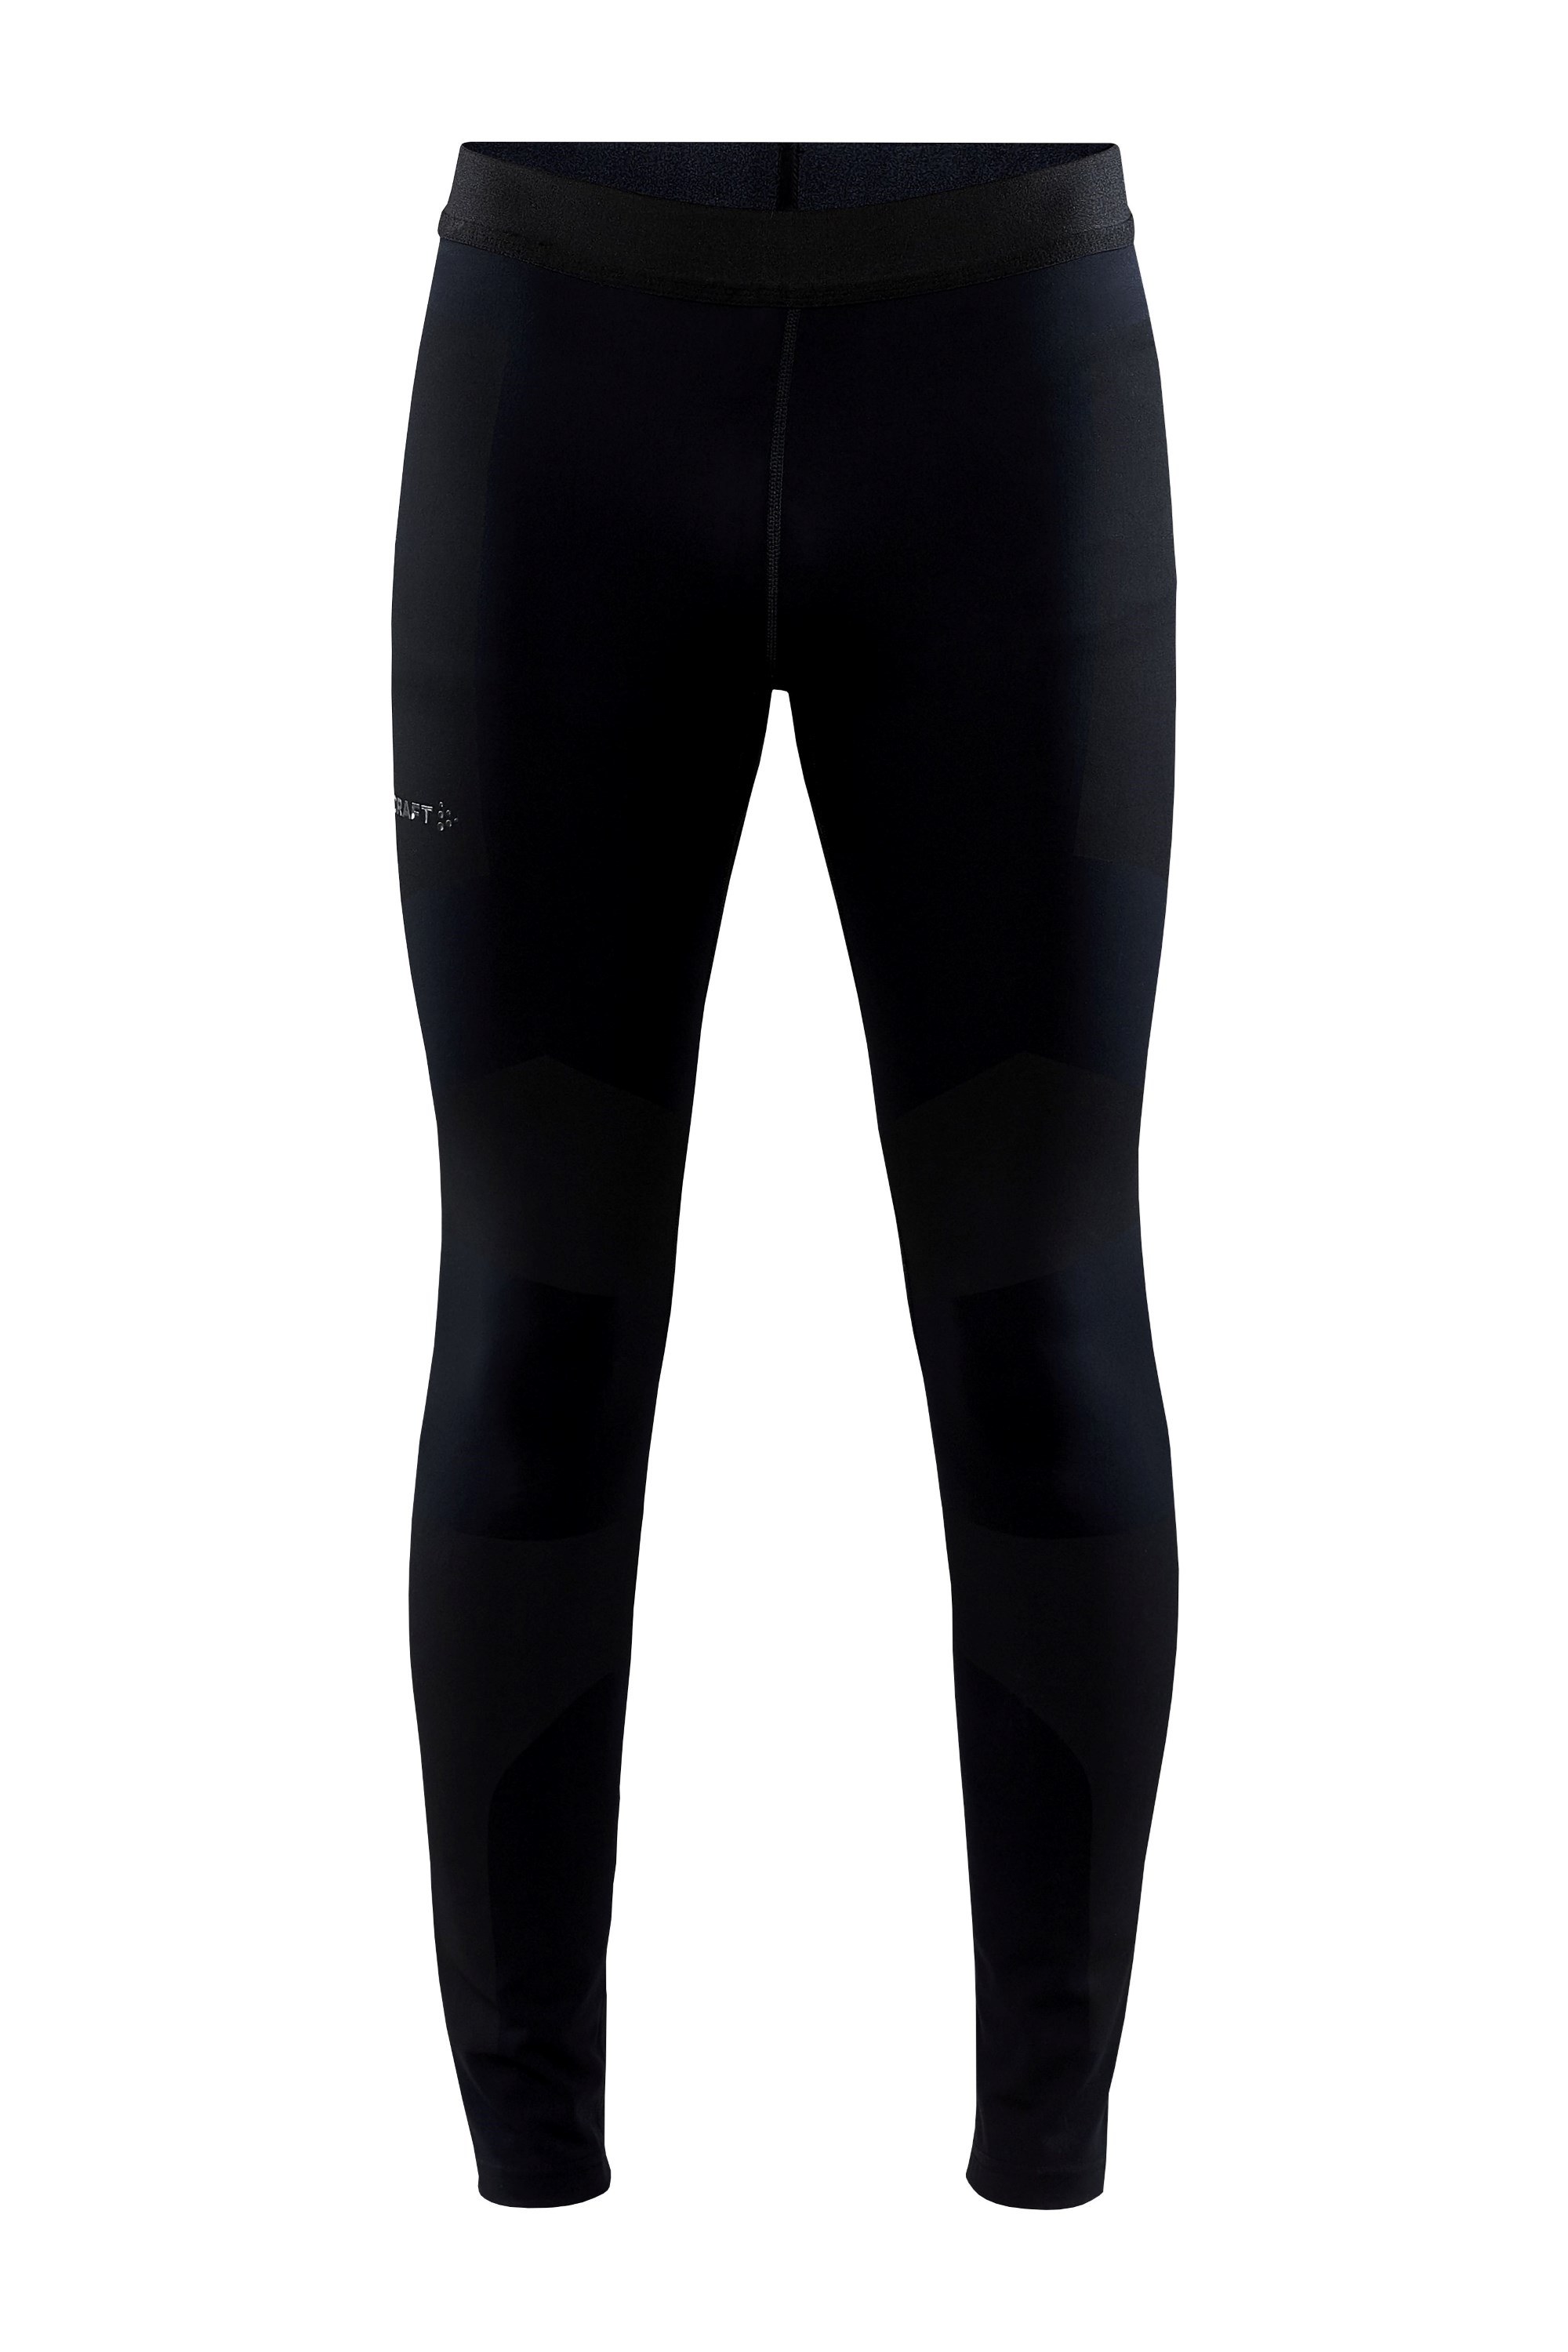 CTM Distance Mens Running Tights -